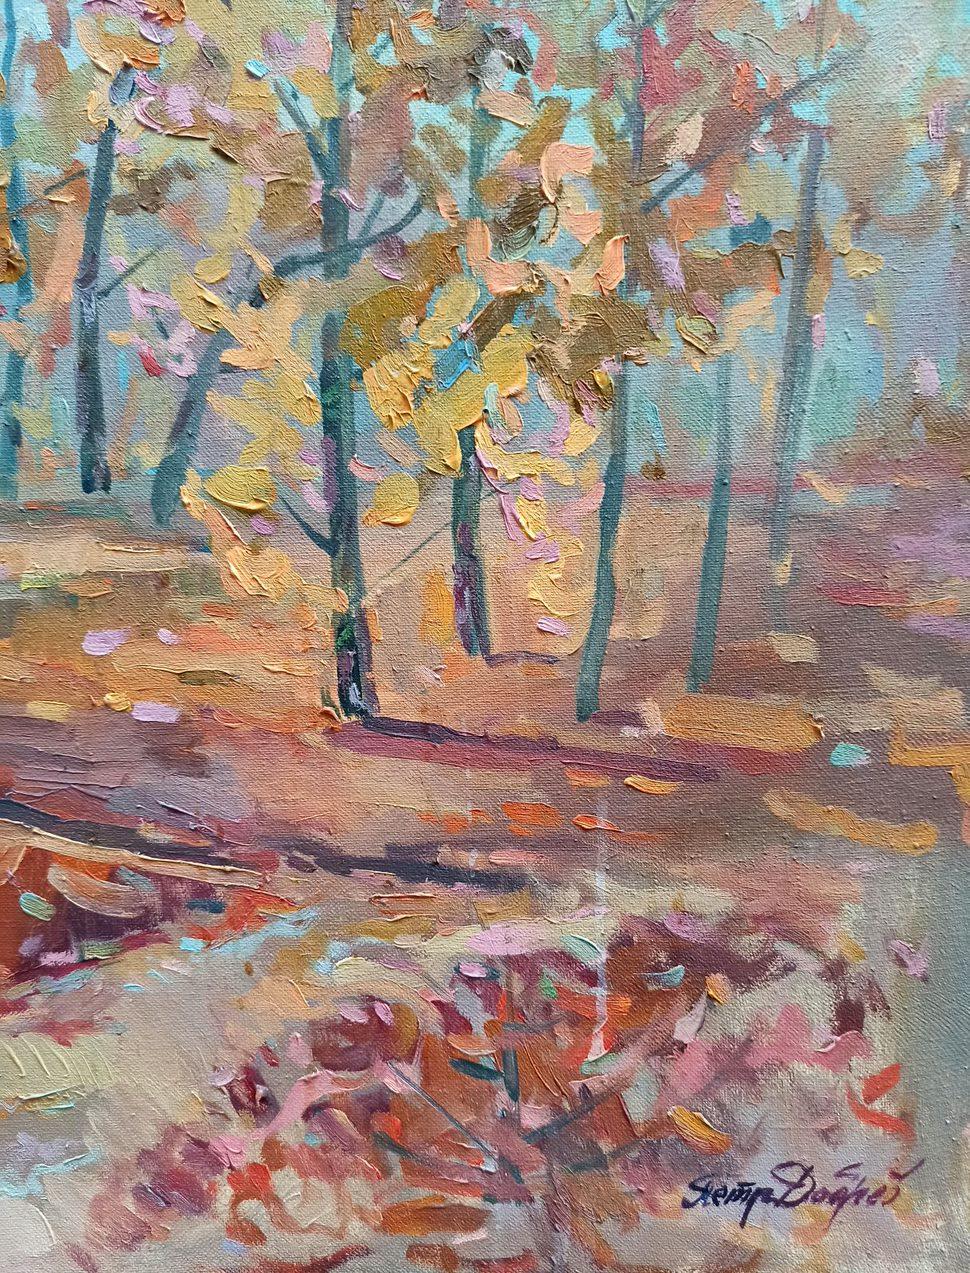 Autumn Sunny Day, Landscape, Original oil Painting, Ready to Hang - Gray Landscape Painting by Peter Tovpev